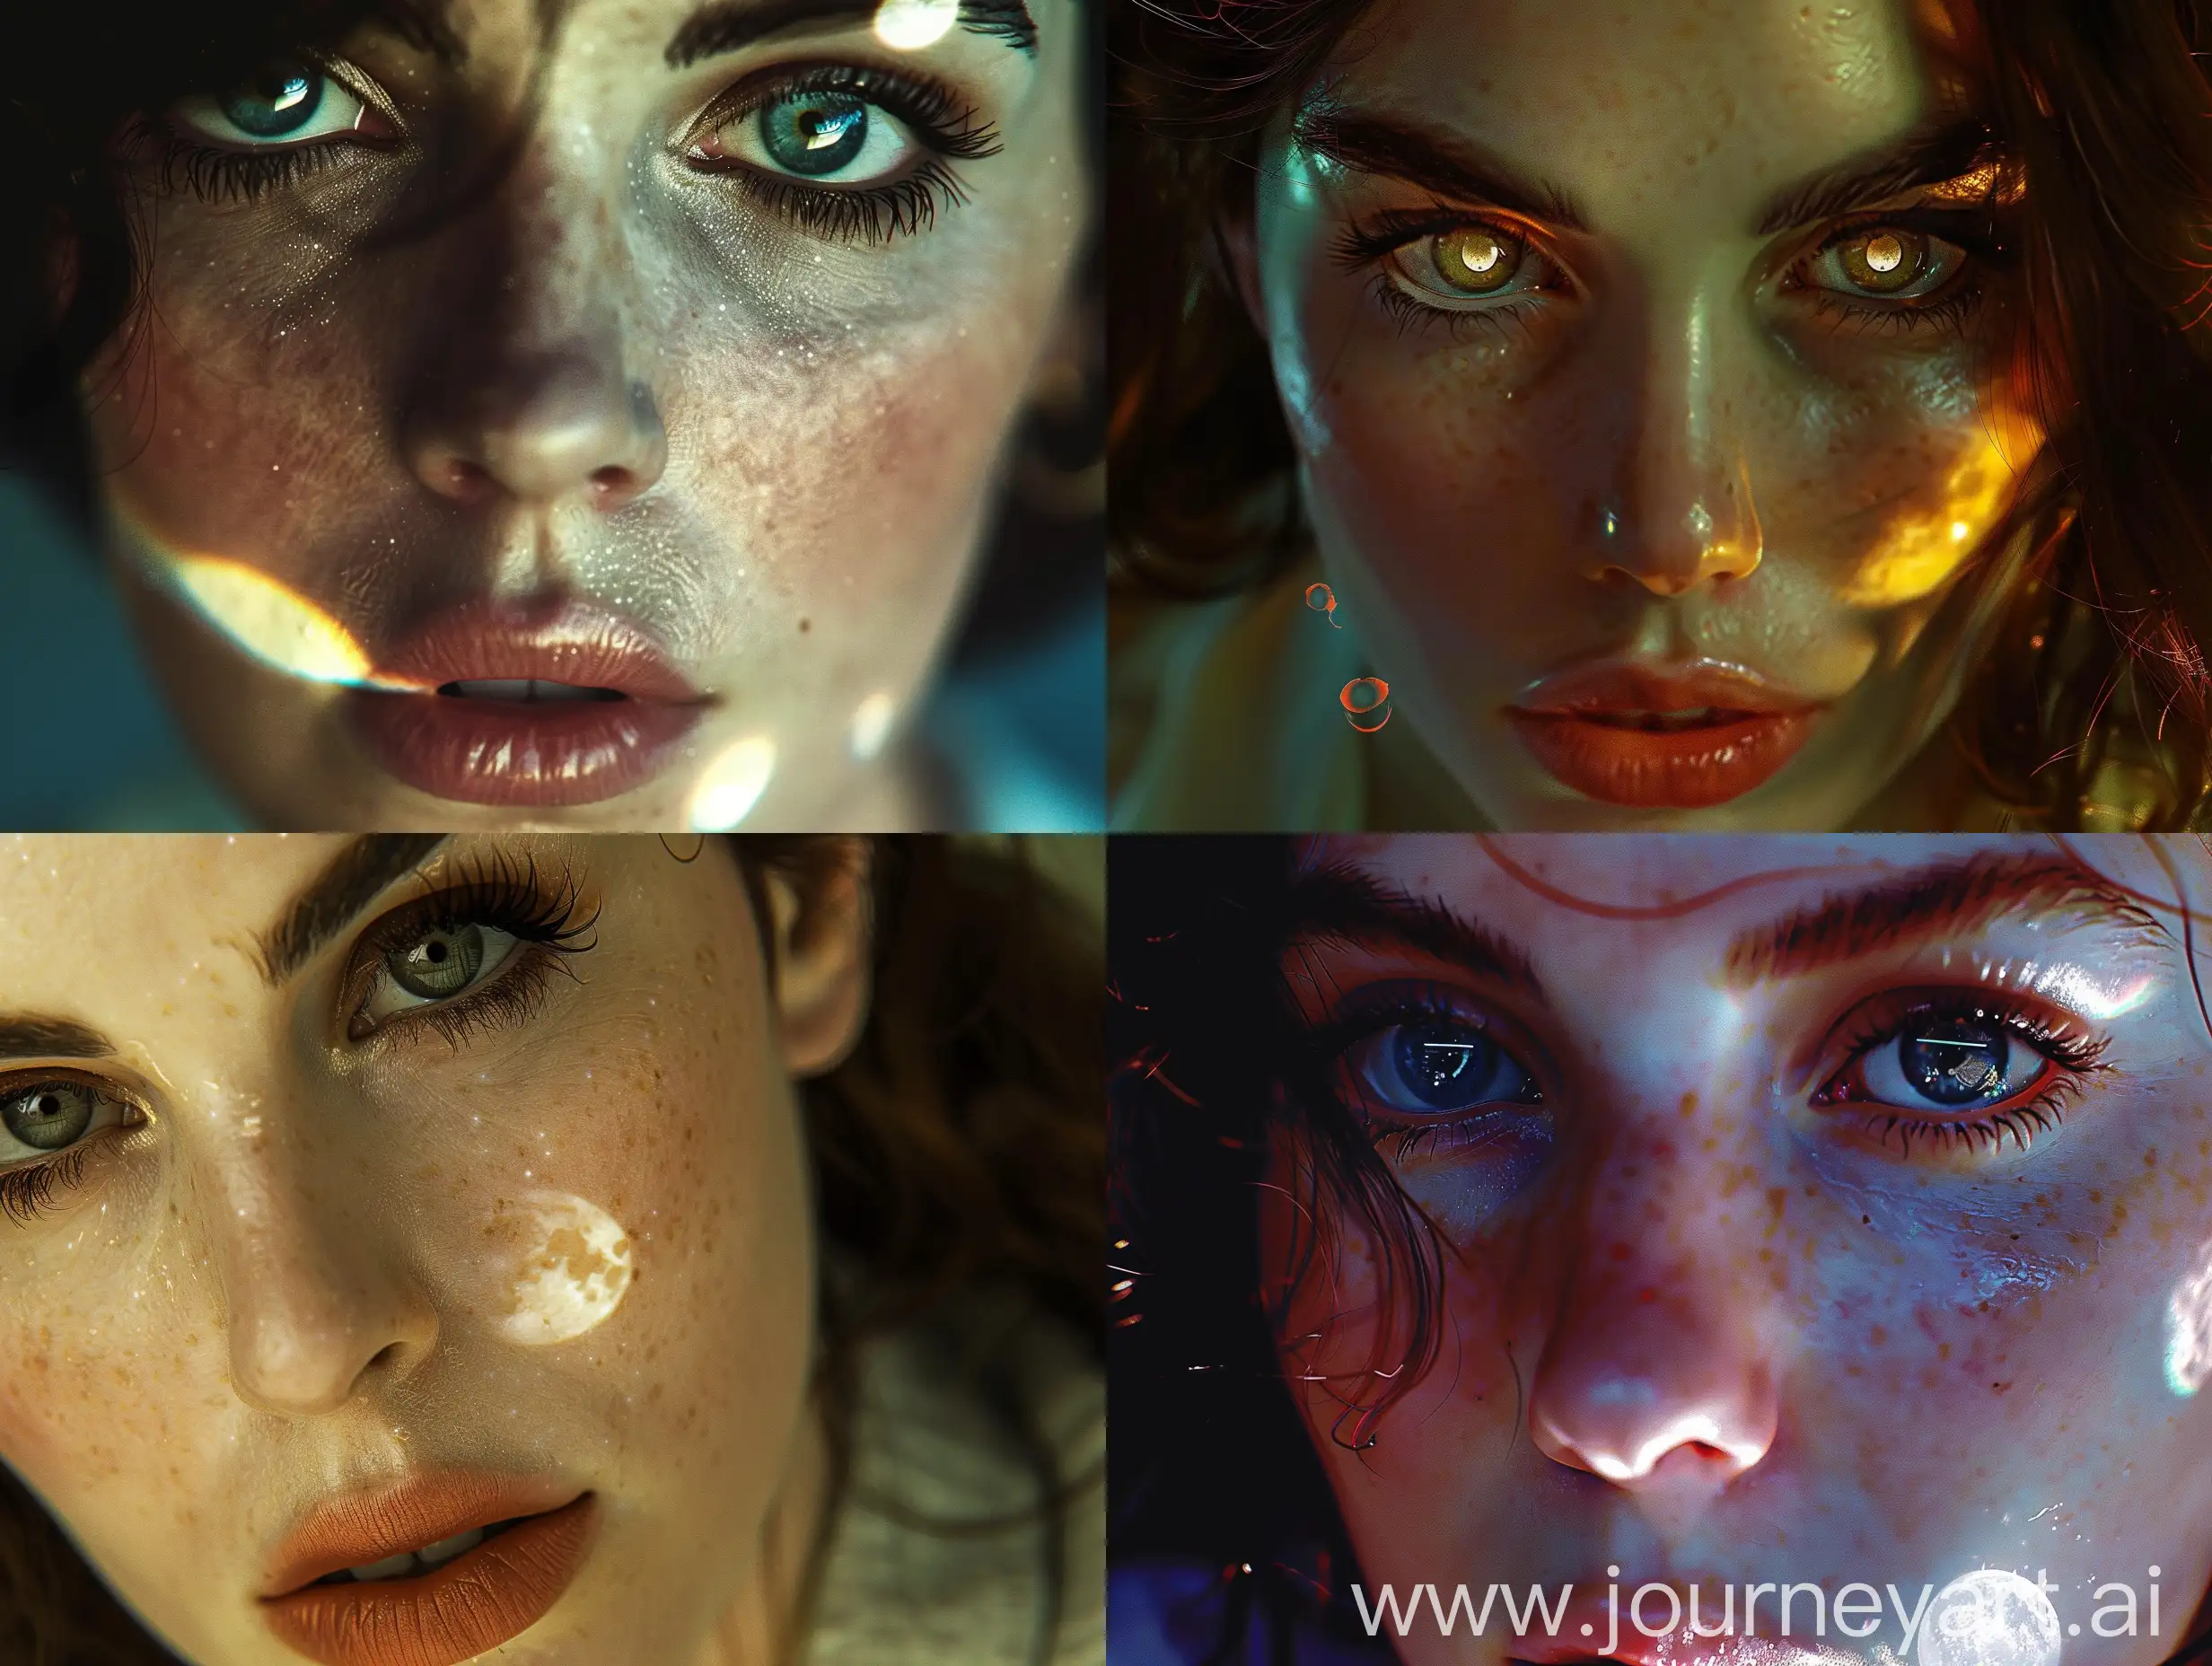 Lana-del-Rey-CloseUp-Portrait-with-Enchanting-Moon-Reflection-in-Eyes